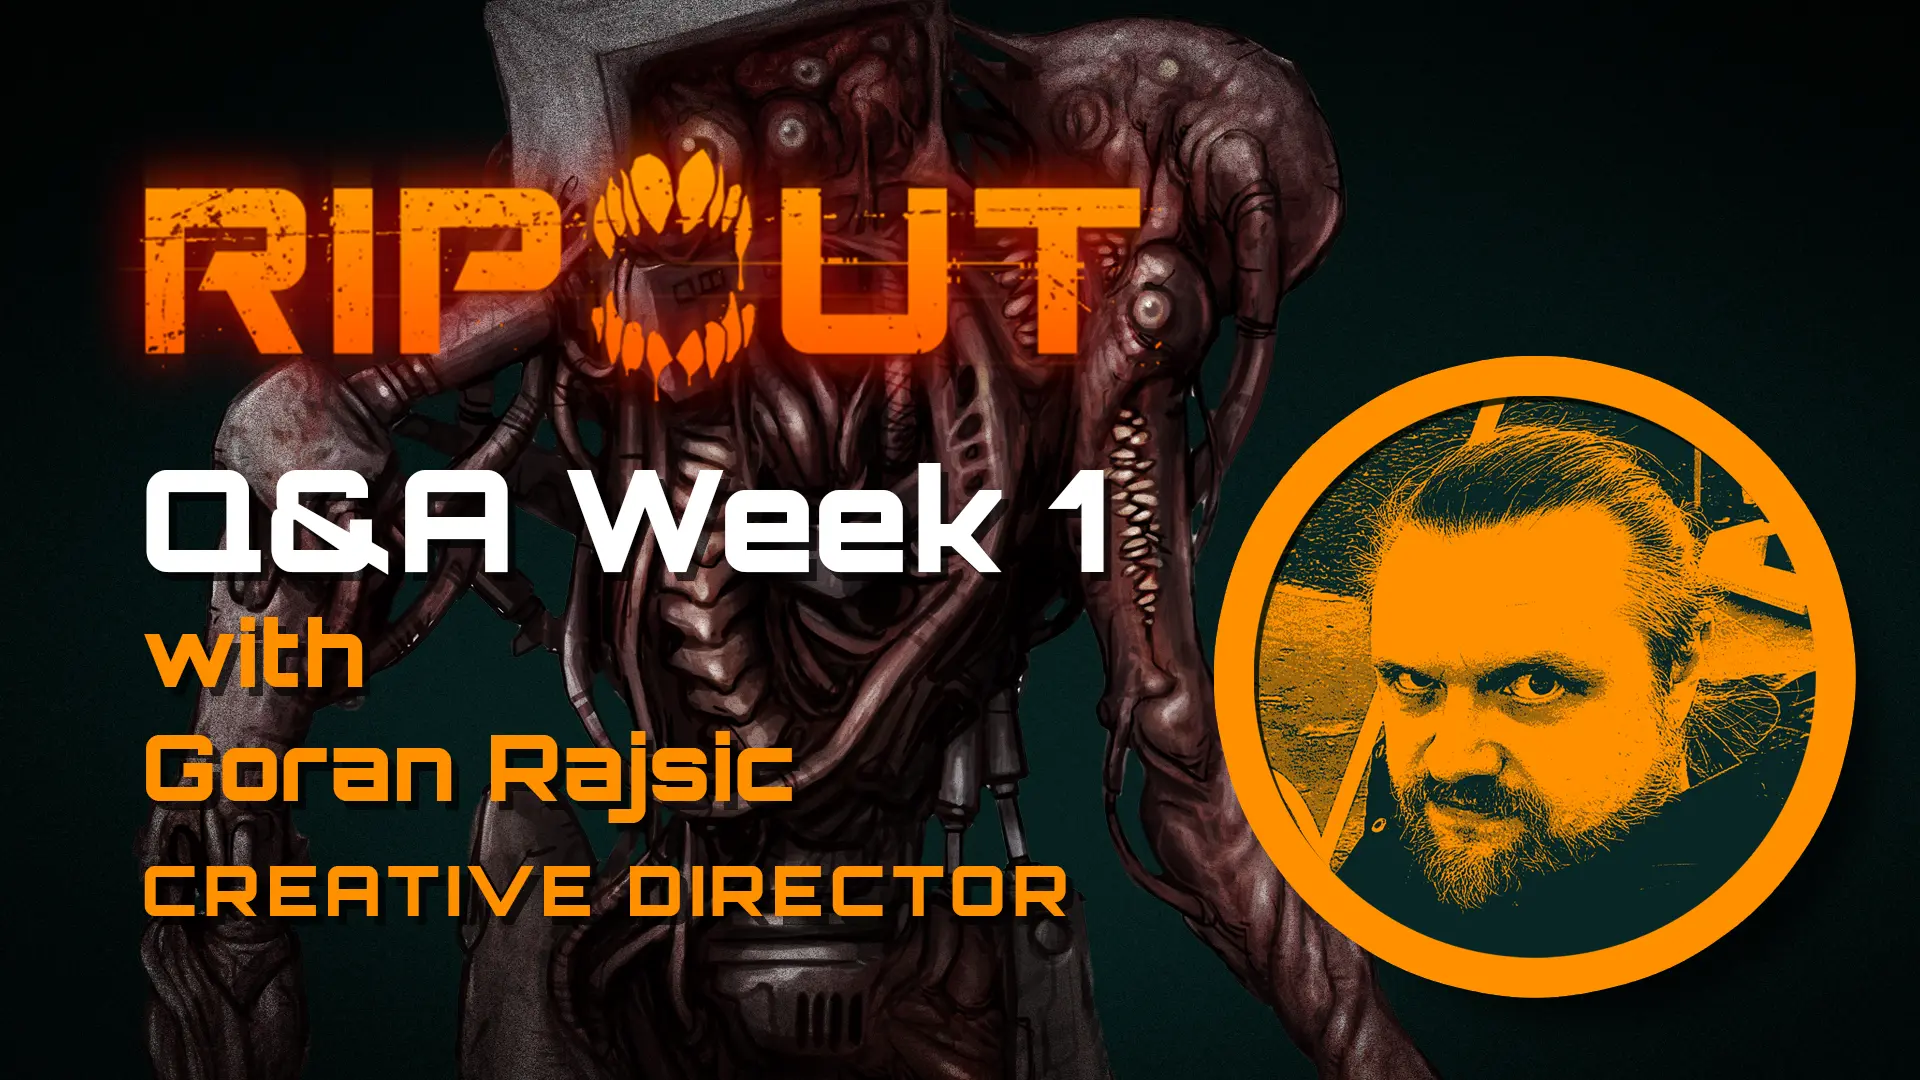 Ripout Q&A with Goran Rajsic week 1 illustrated